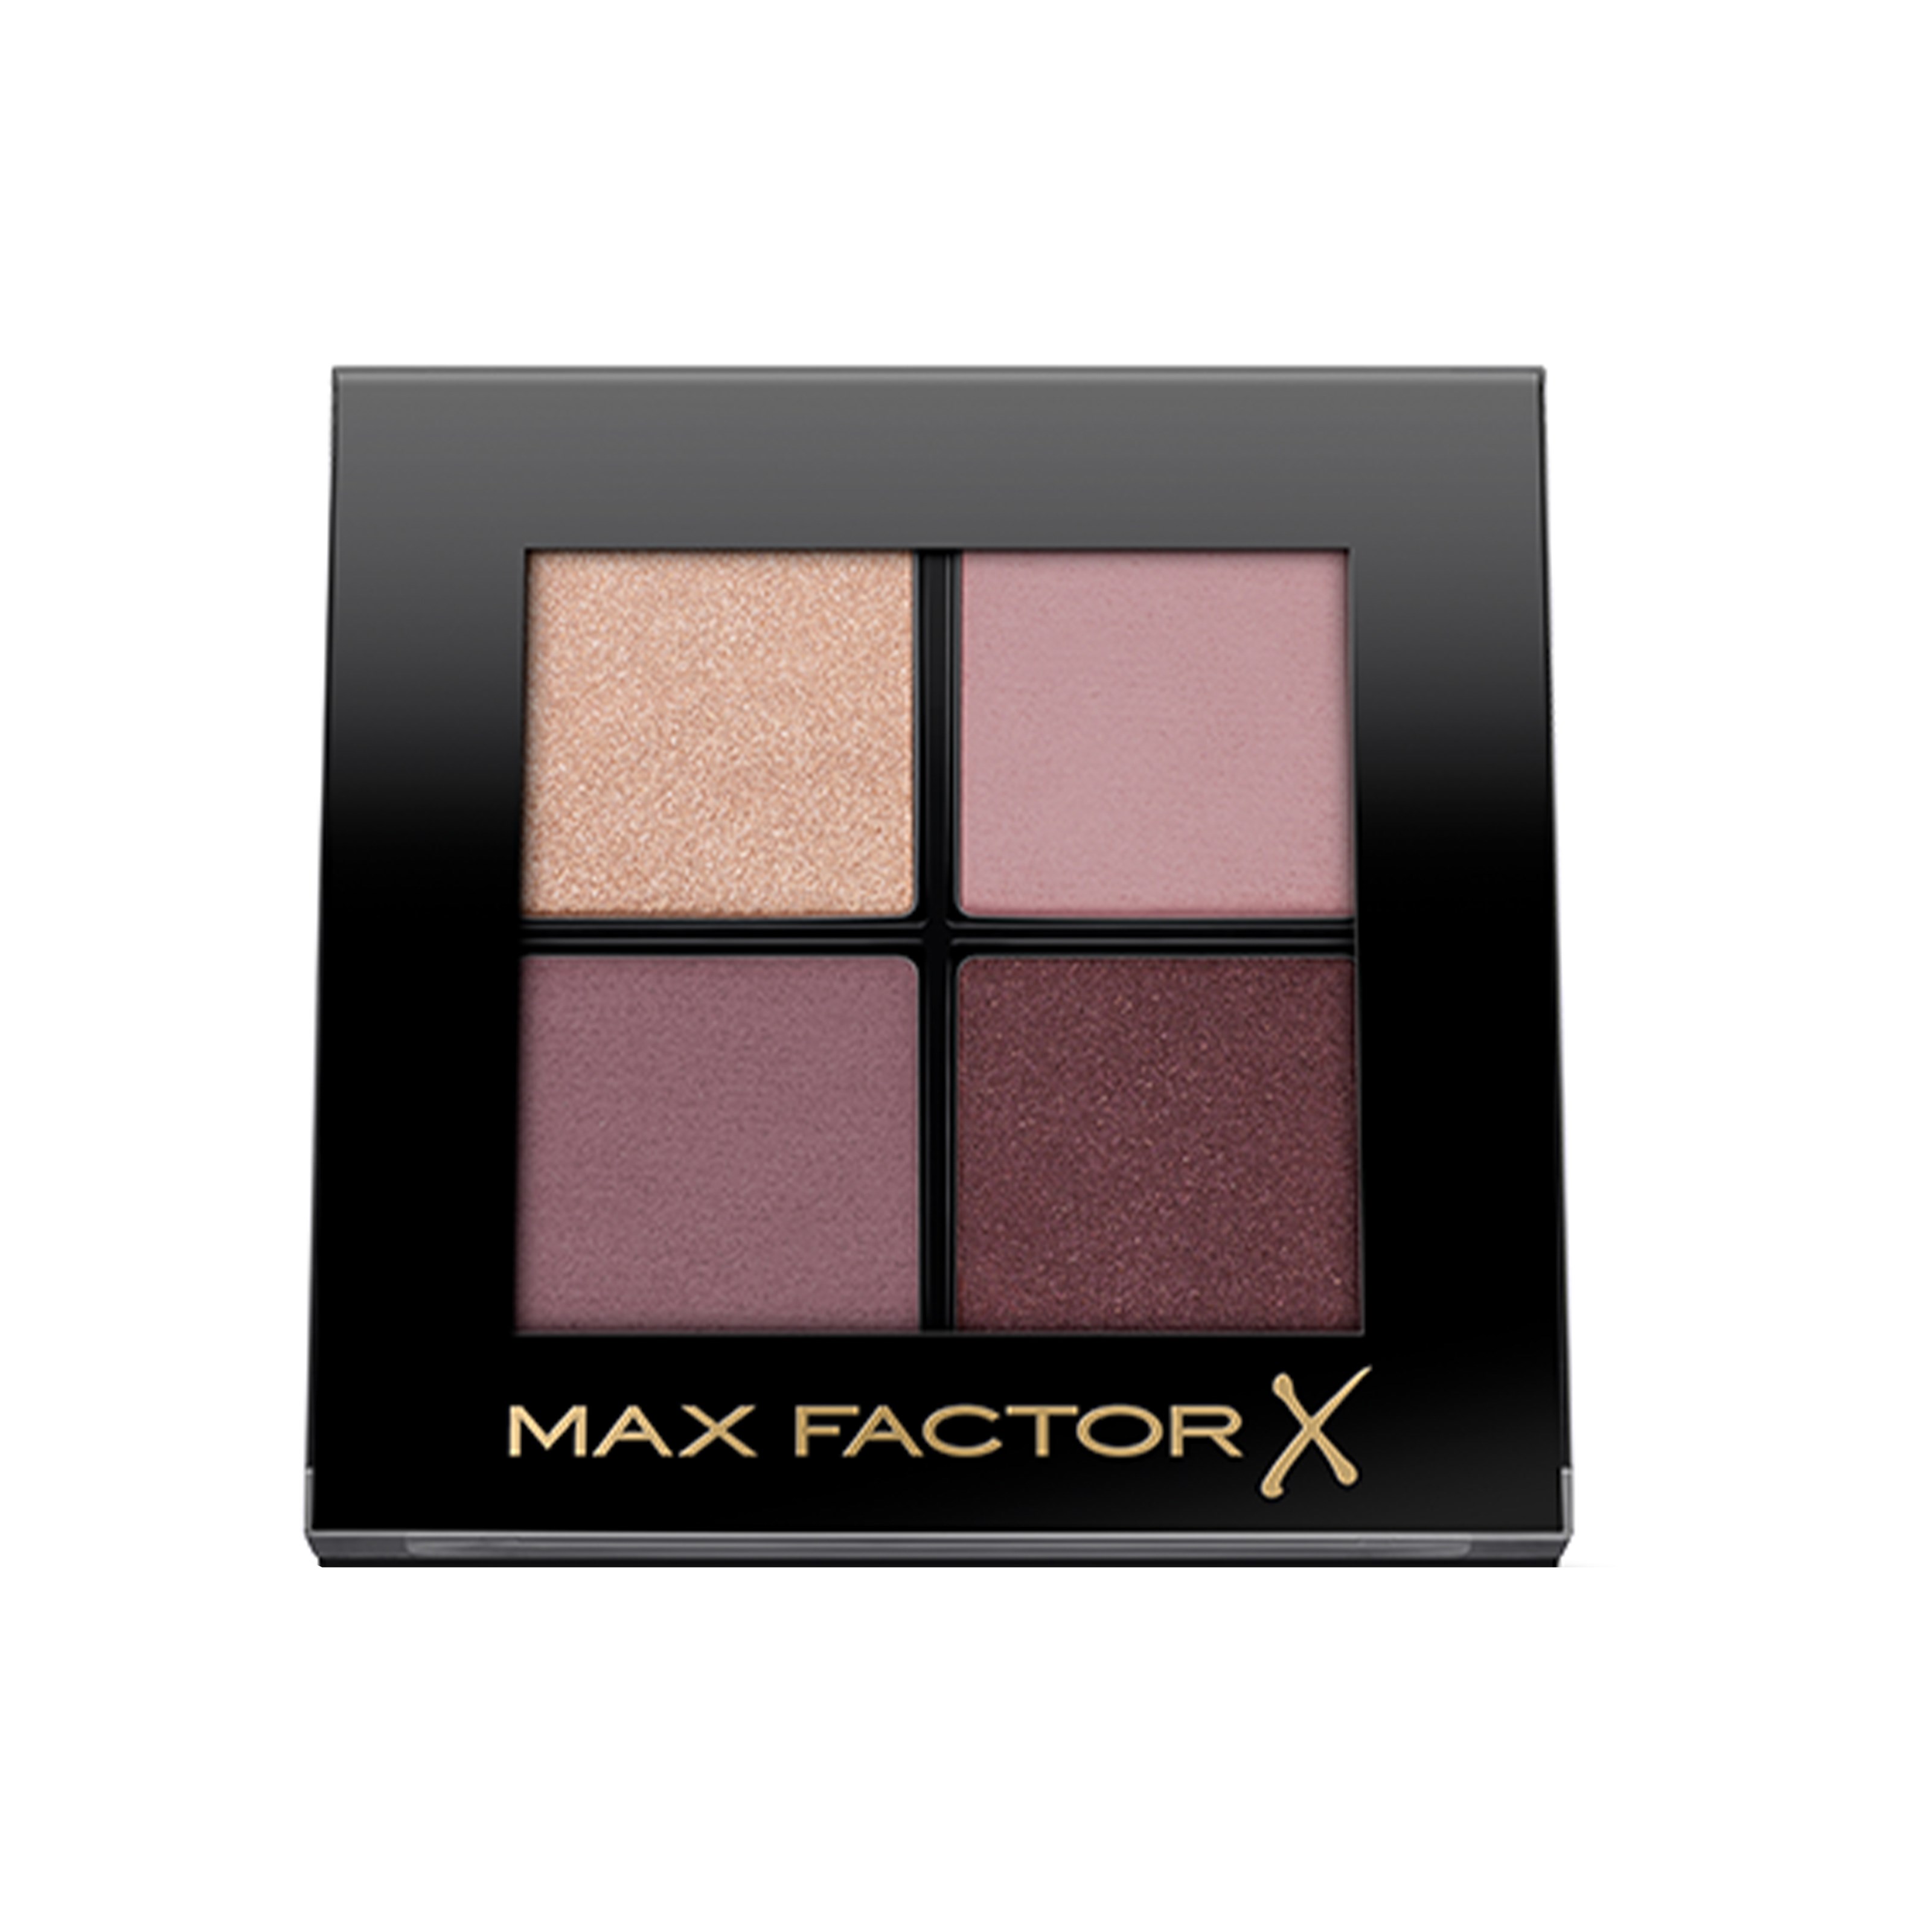 Läs mer om Max Factor Colour X-Pert Soft Touch Palette 02 Crushed Bloom